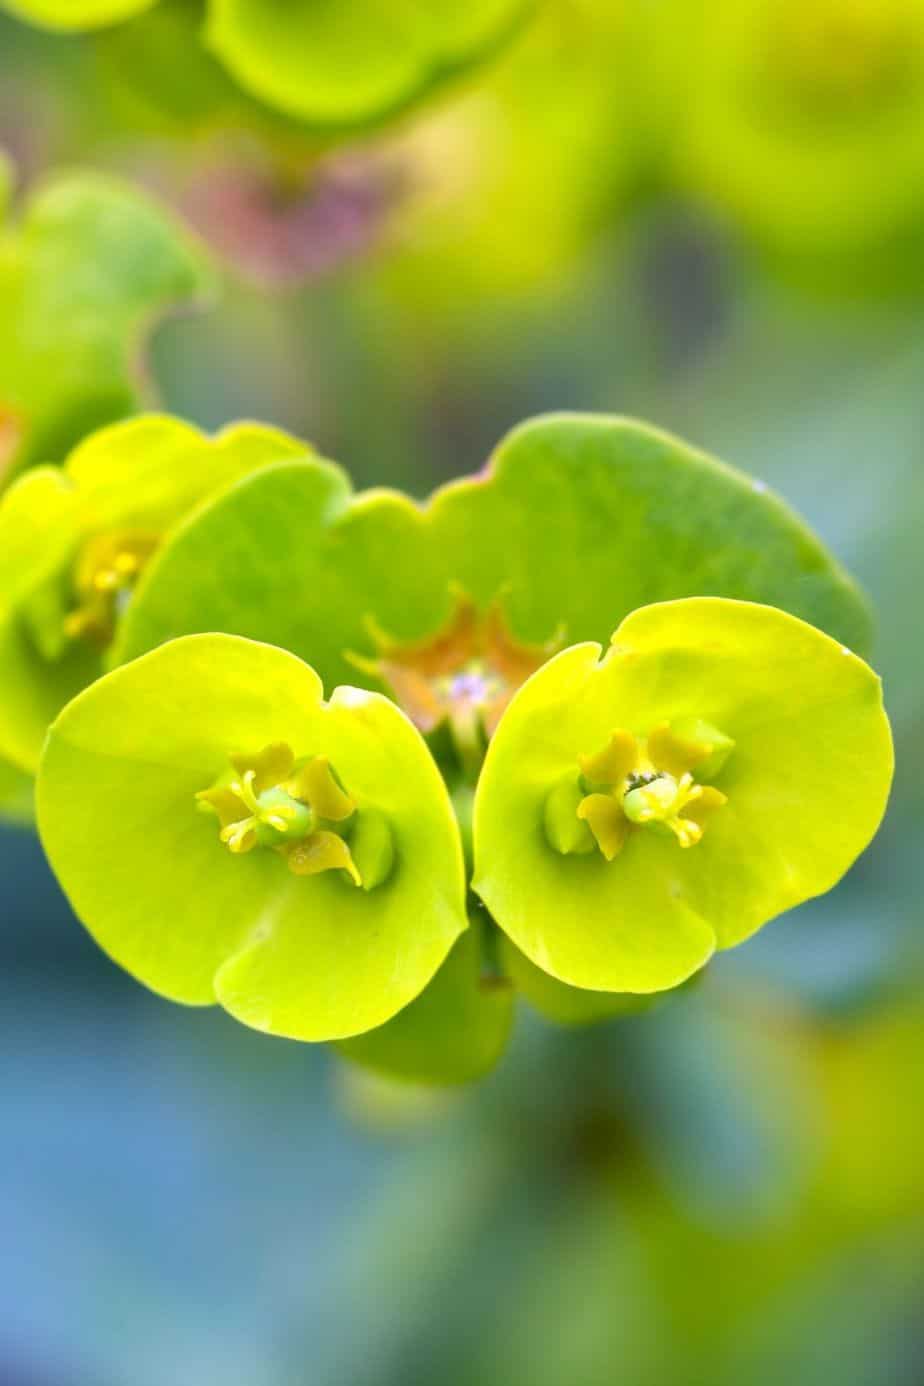 Euphorbia Caracius is an evergreen shrub that you can easily grow on your south-facing balcony